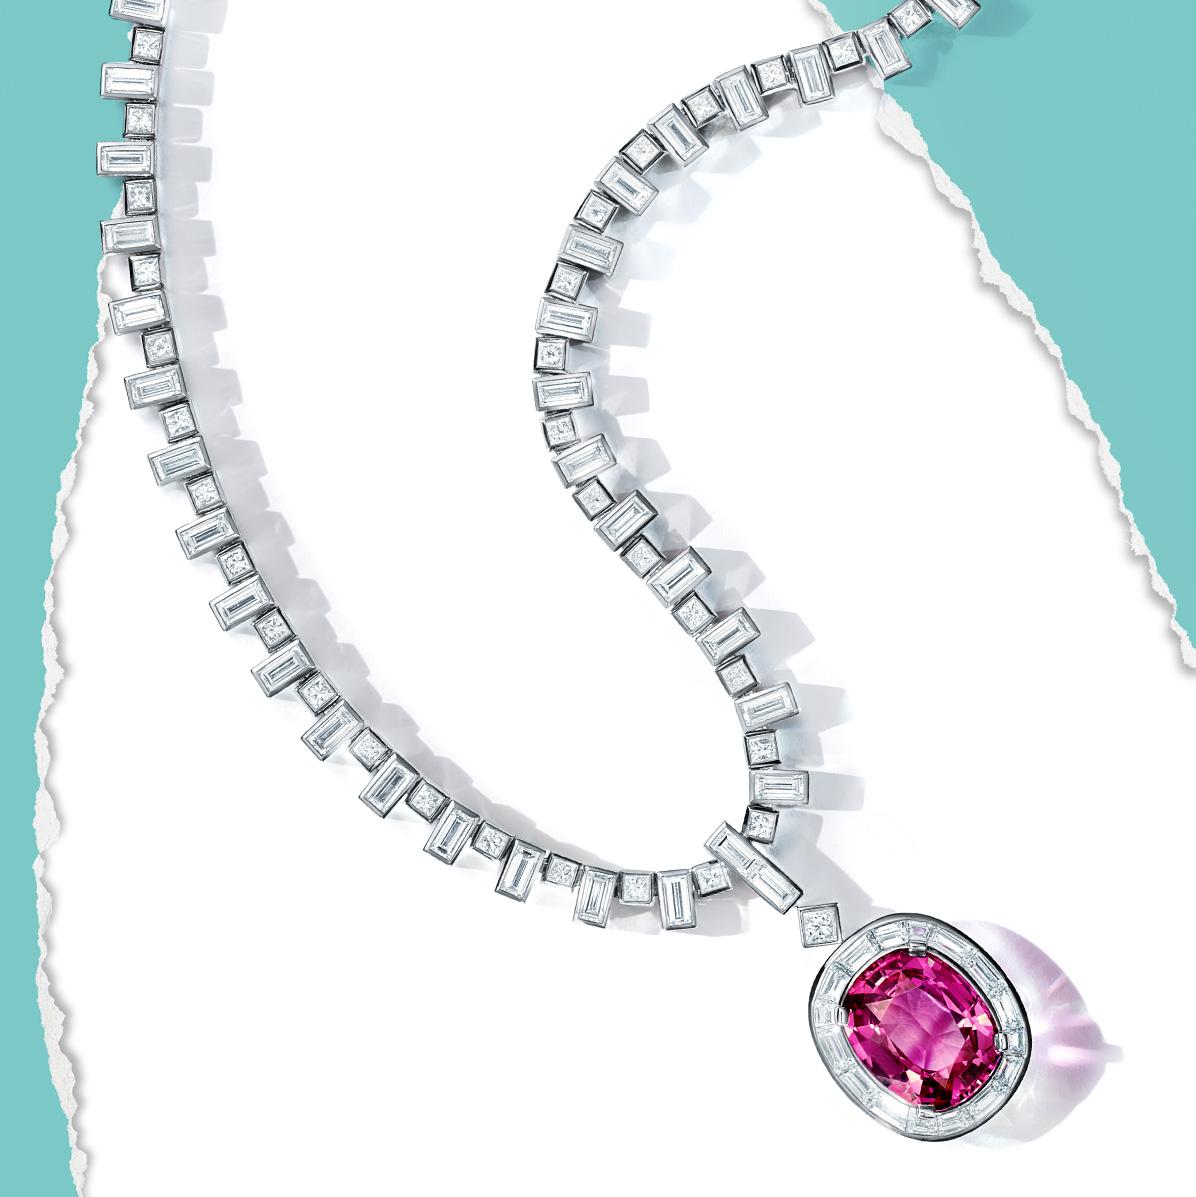 Tiffany & Co. on X: #ATiffanyDiamondADay—Think Pink. The pink sapphire in  this necklace is strongly saturated—extremely rare given most unenhanced  pink sapphires are lighter in tone. To find one of this saturation